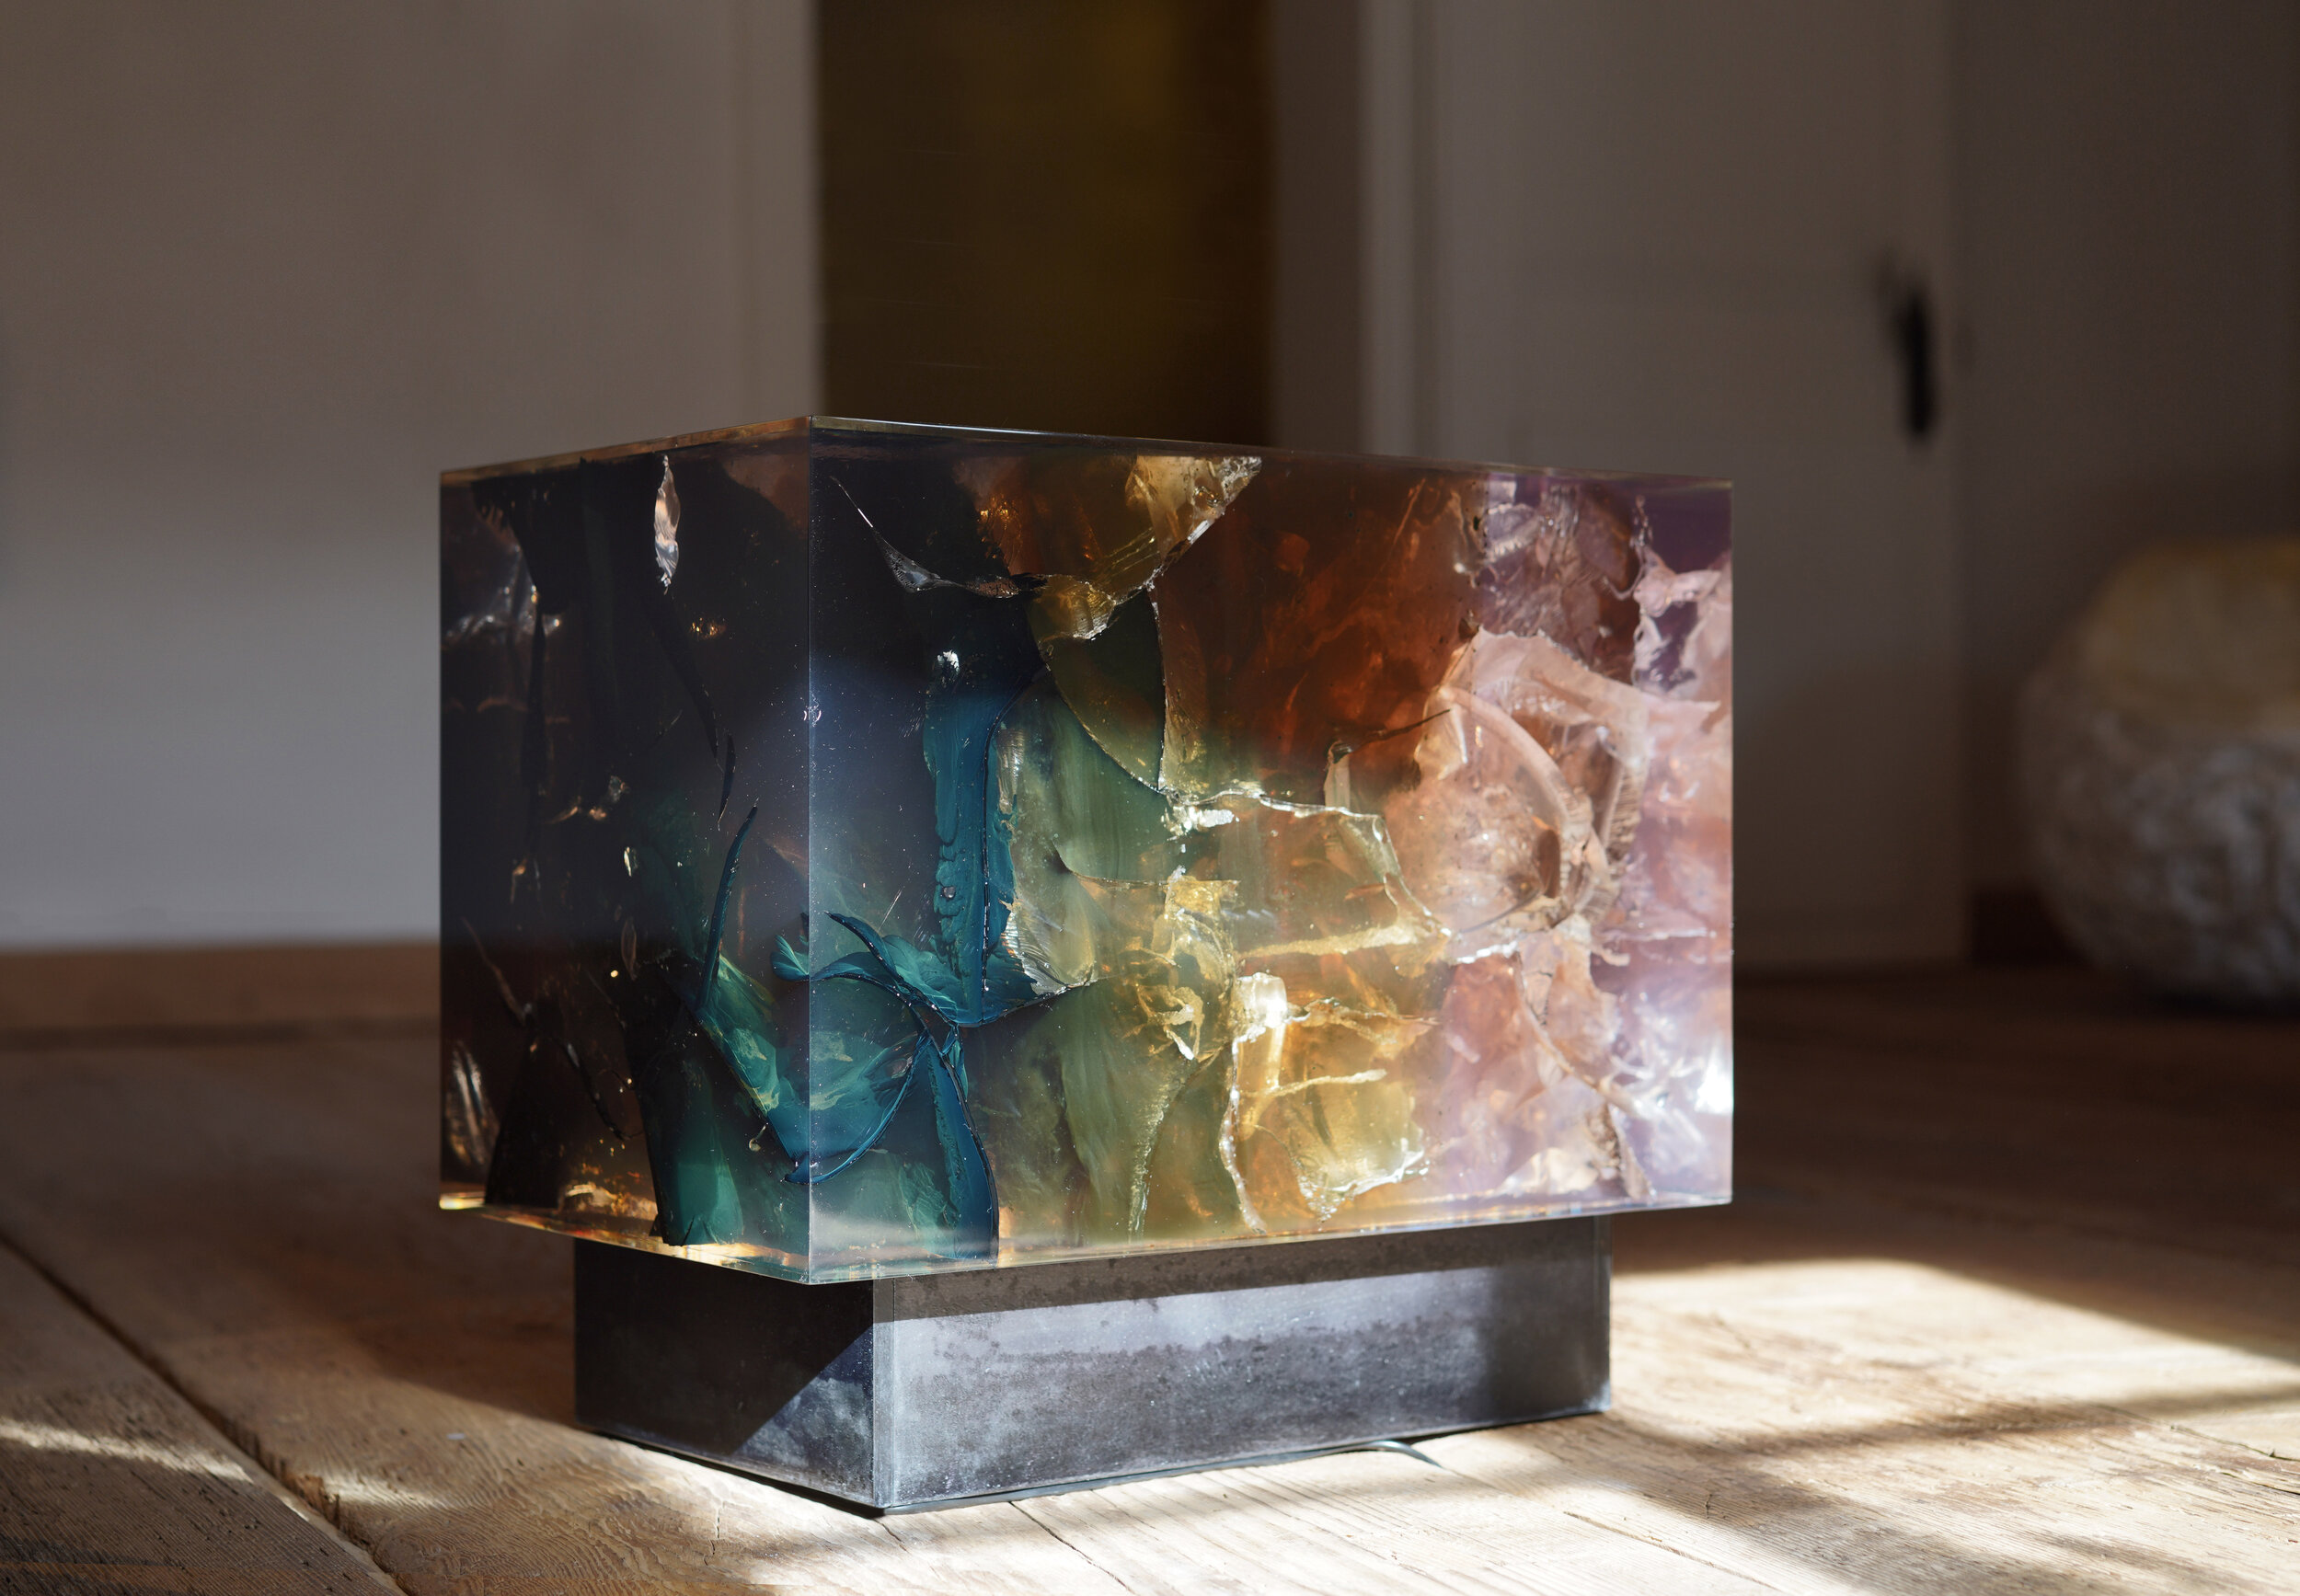  Sculptural block and bench by Tom Price. Resin, tar, steel, lighting 